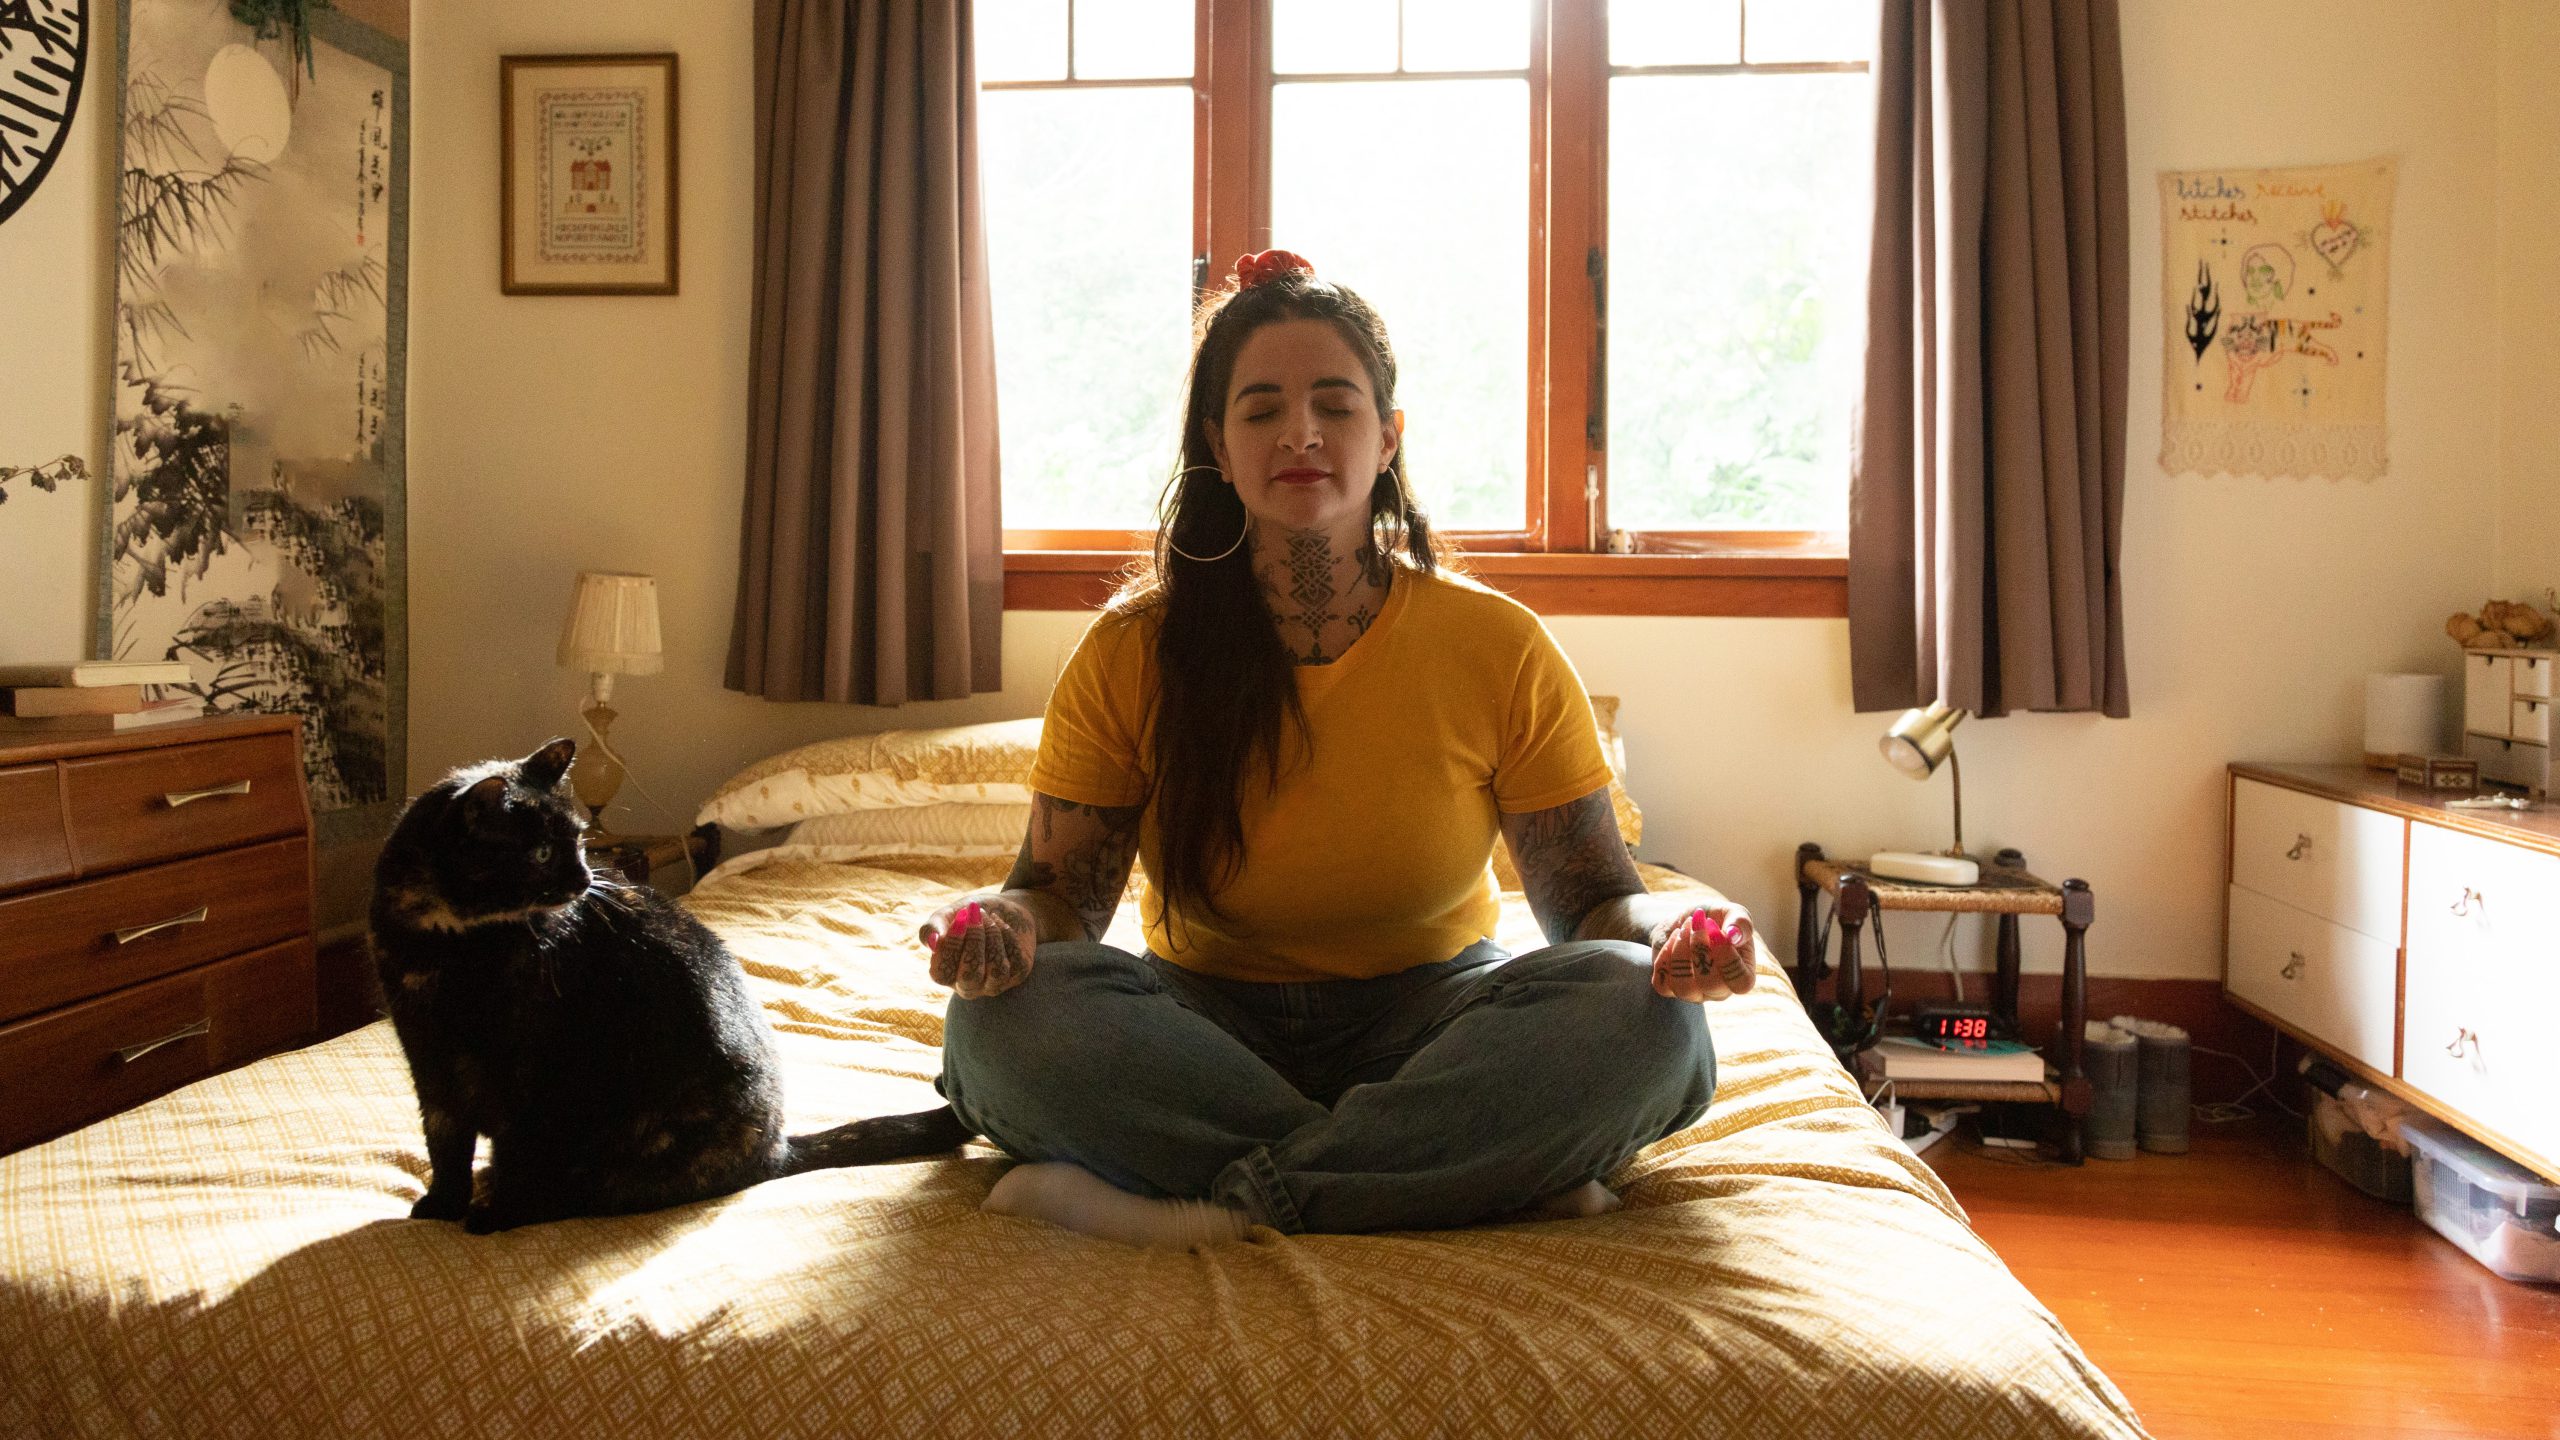 tattooed woman sitting on bed meditating with cat